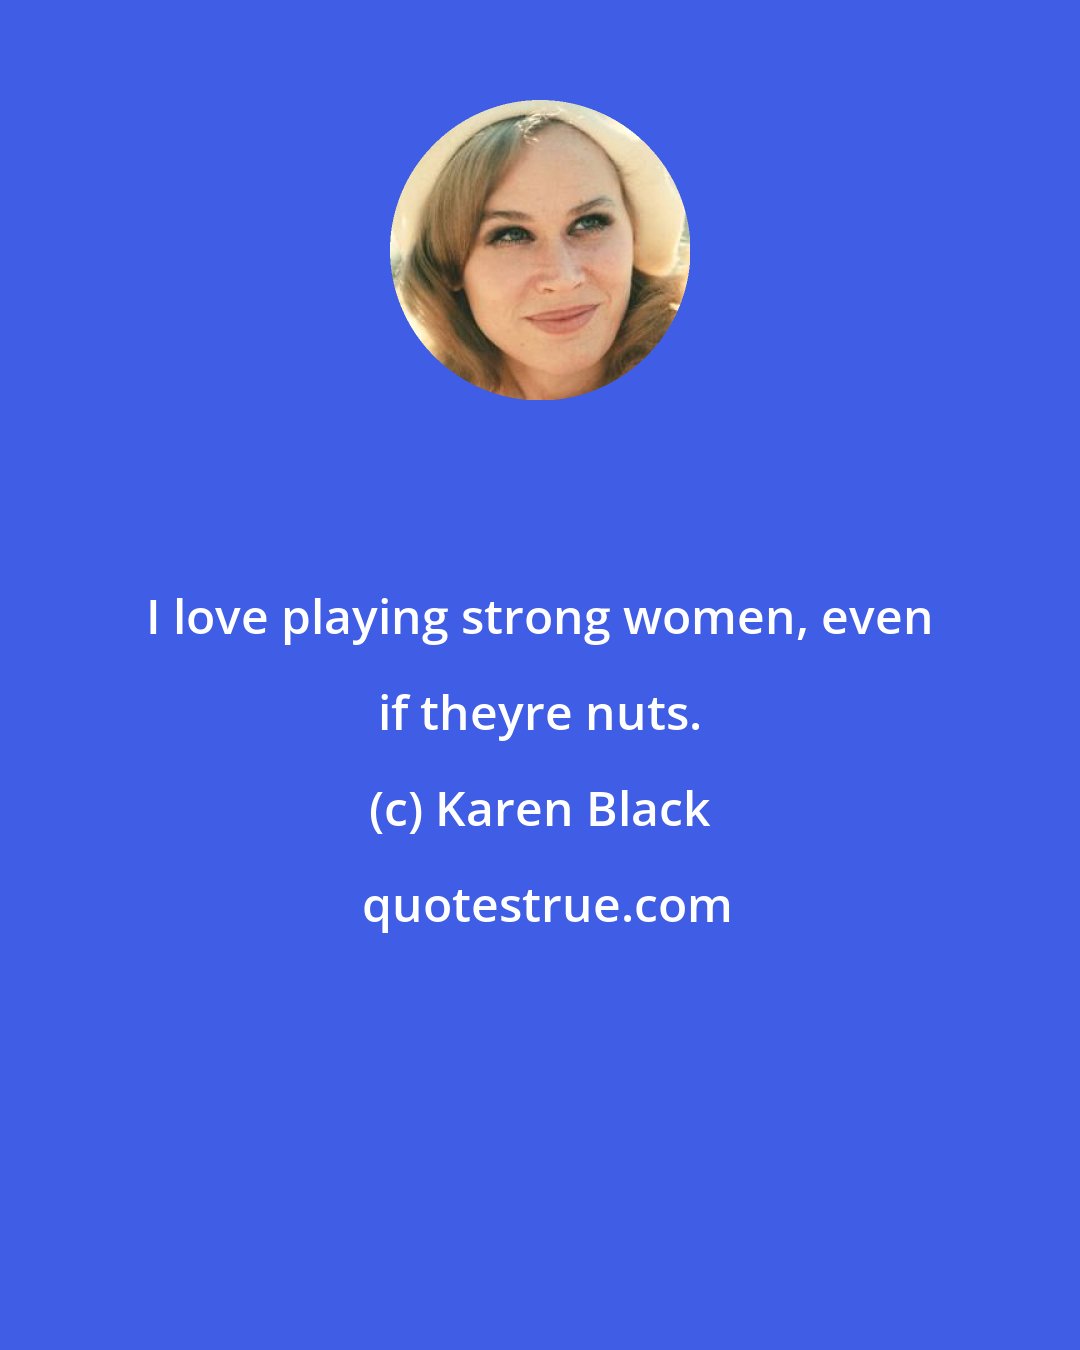 Karen Black: I love playing strong women, even if theyre nuts.